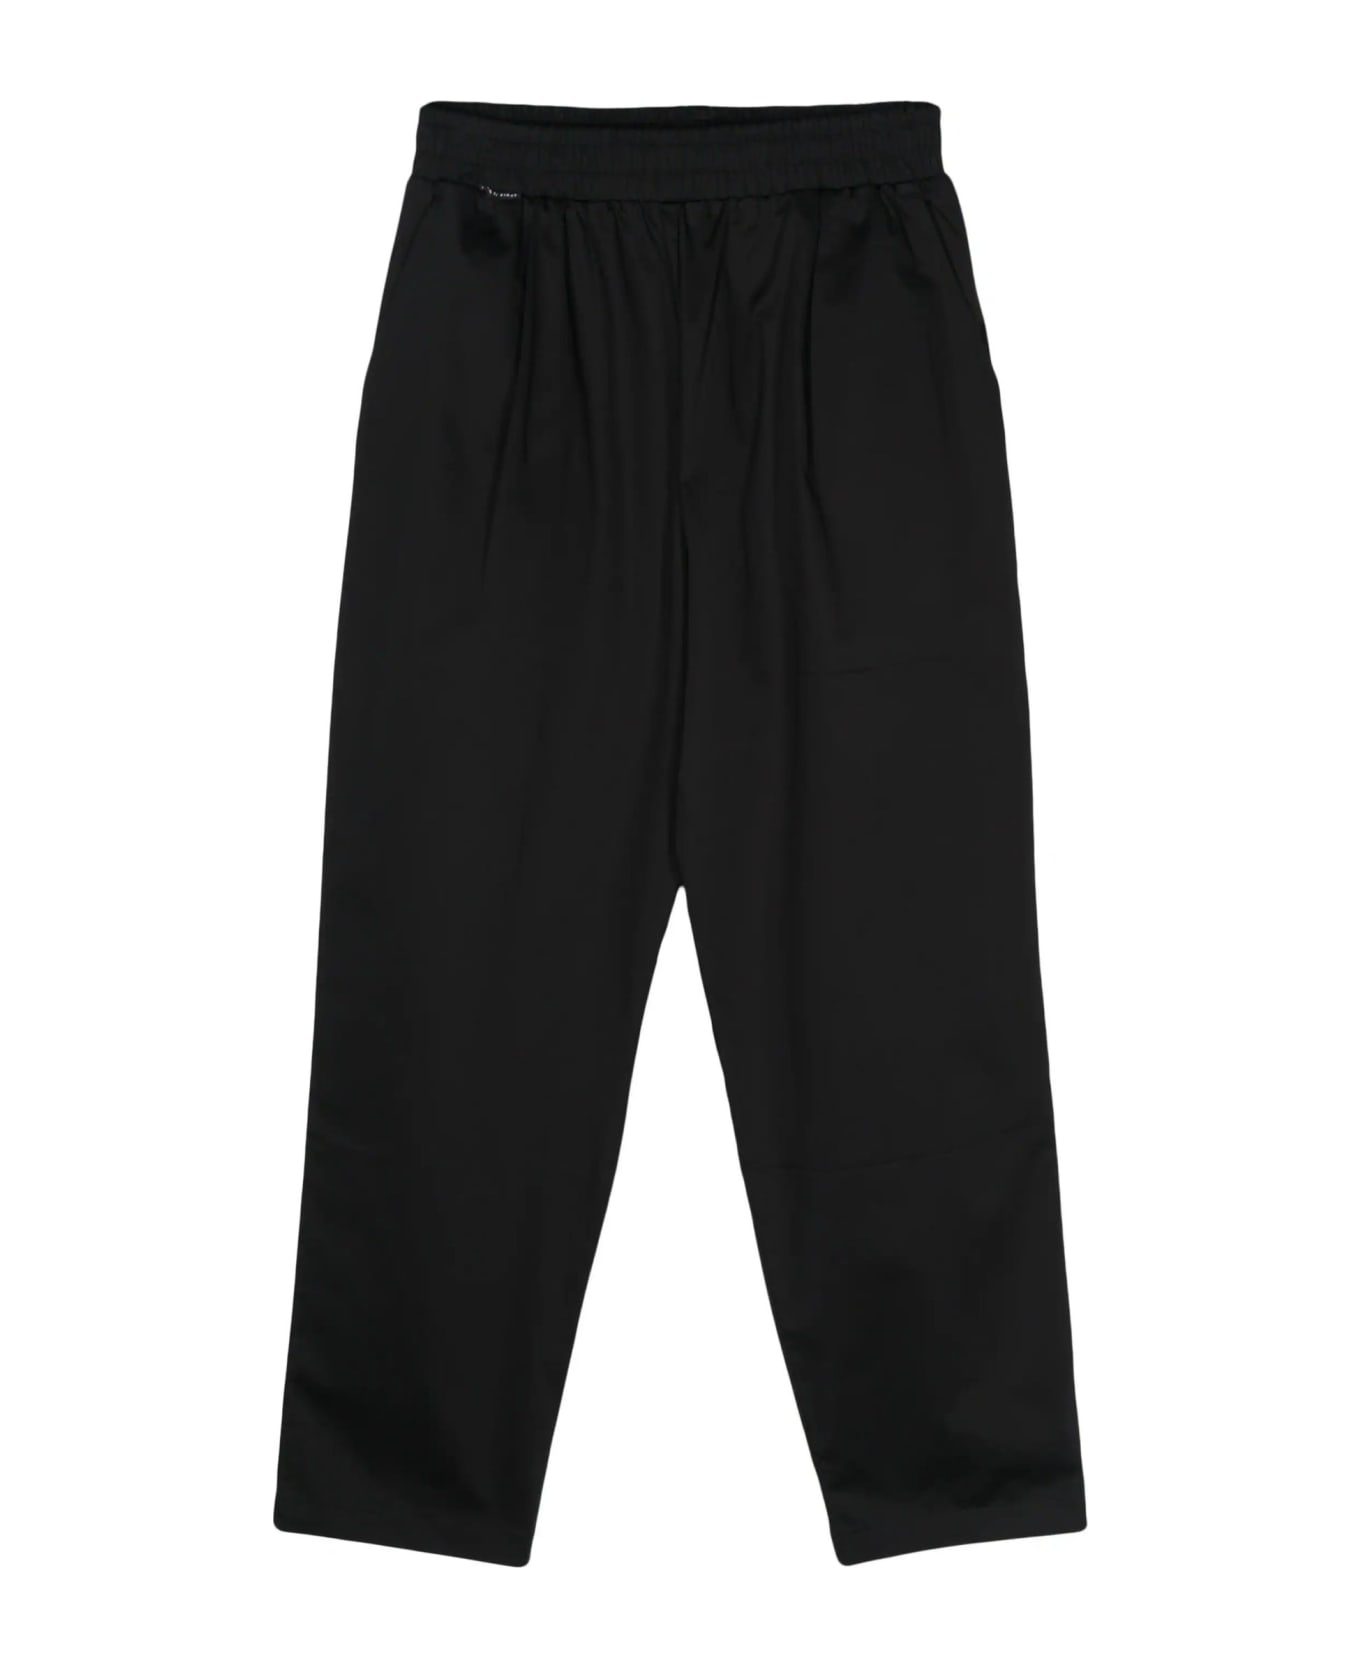 Family First Milano Family First Trousers Black - Black ボトムス